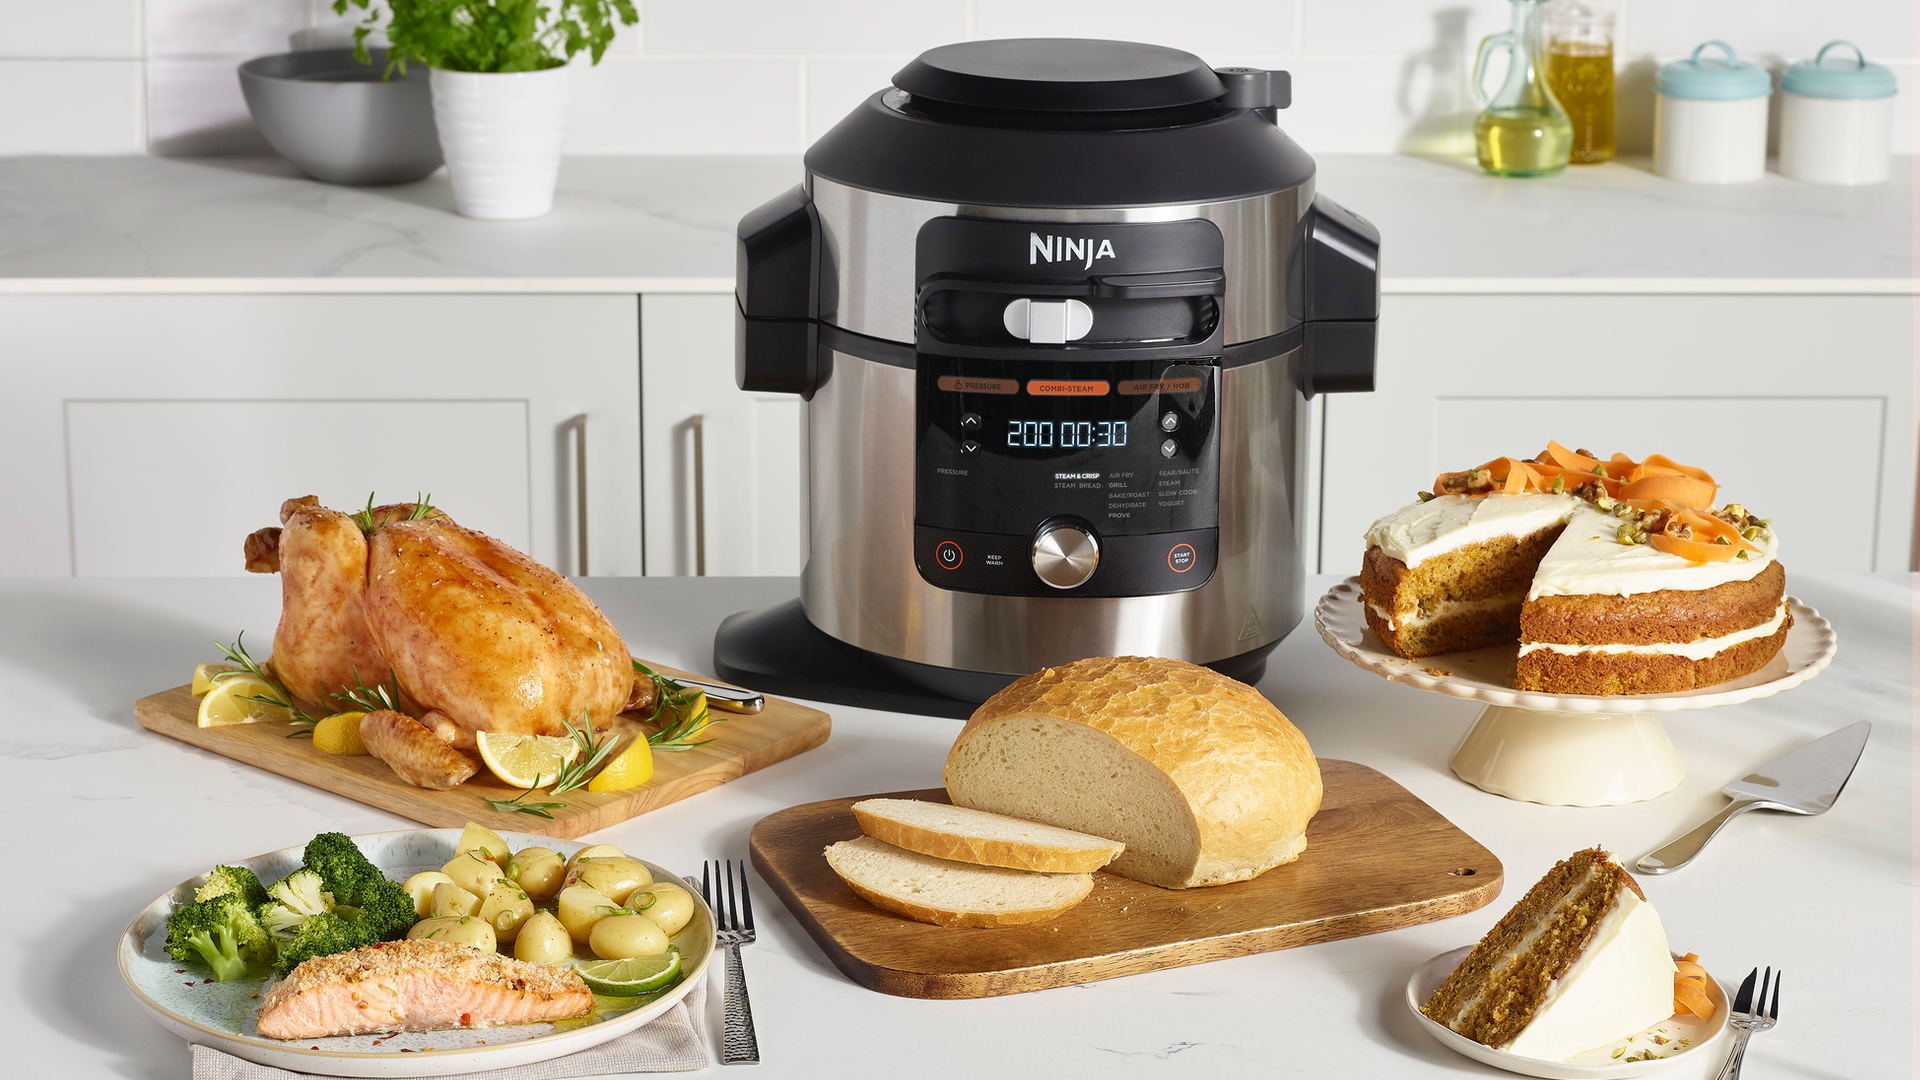 Ninja Foodi 11-in-1 Smartlid Multi-Cooker Review - Also The Crumbs Please